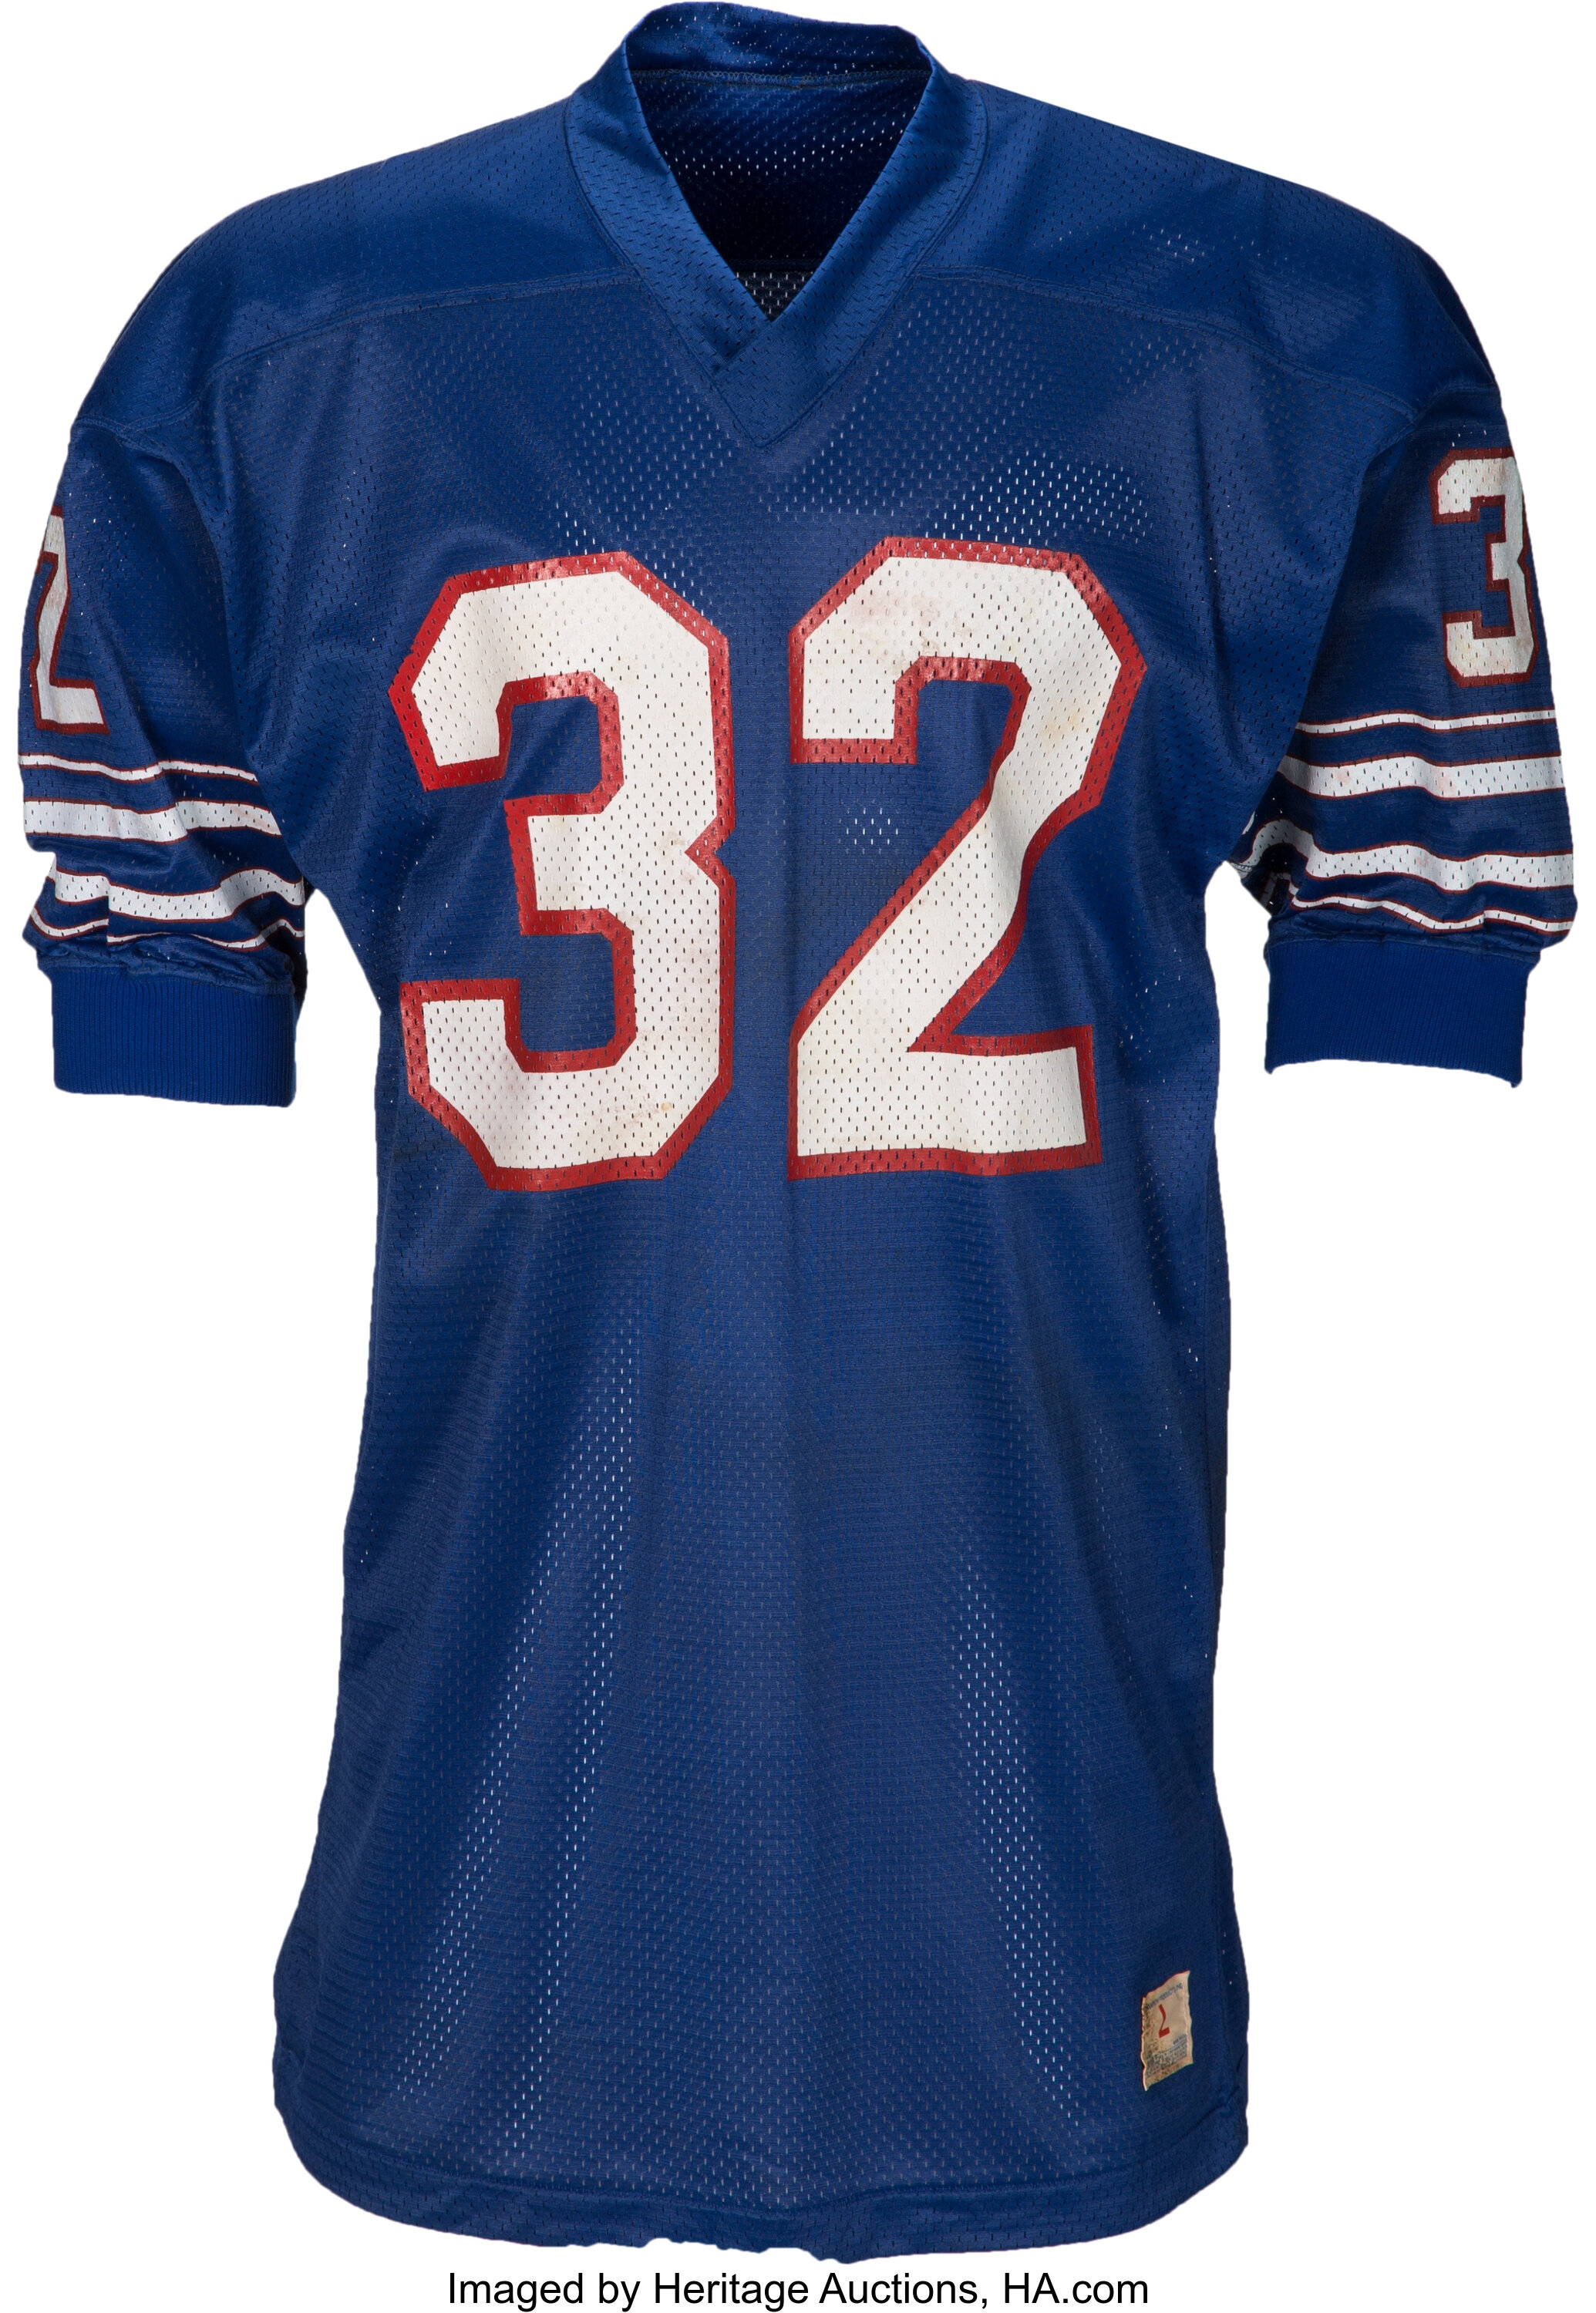 1973 O J Simpson Game Worn Buffalo Bills Jersey From Record 2 000 Lot Heritage Auctions